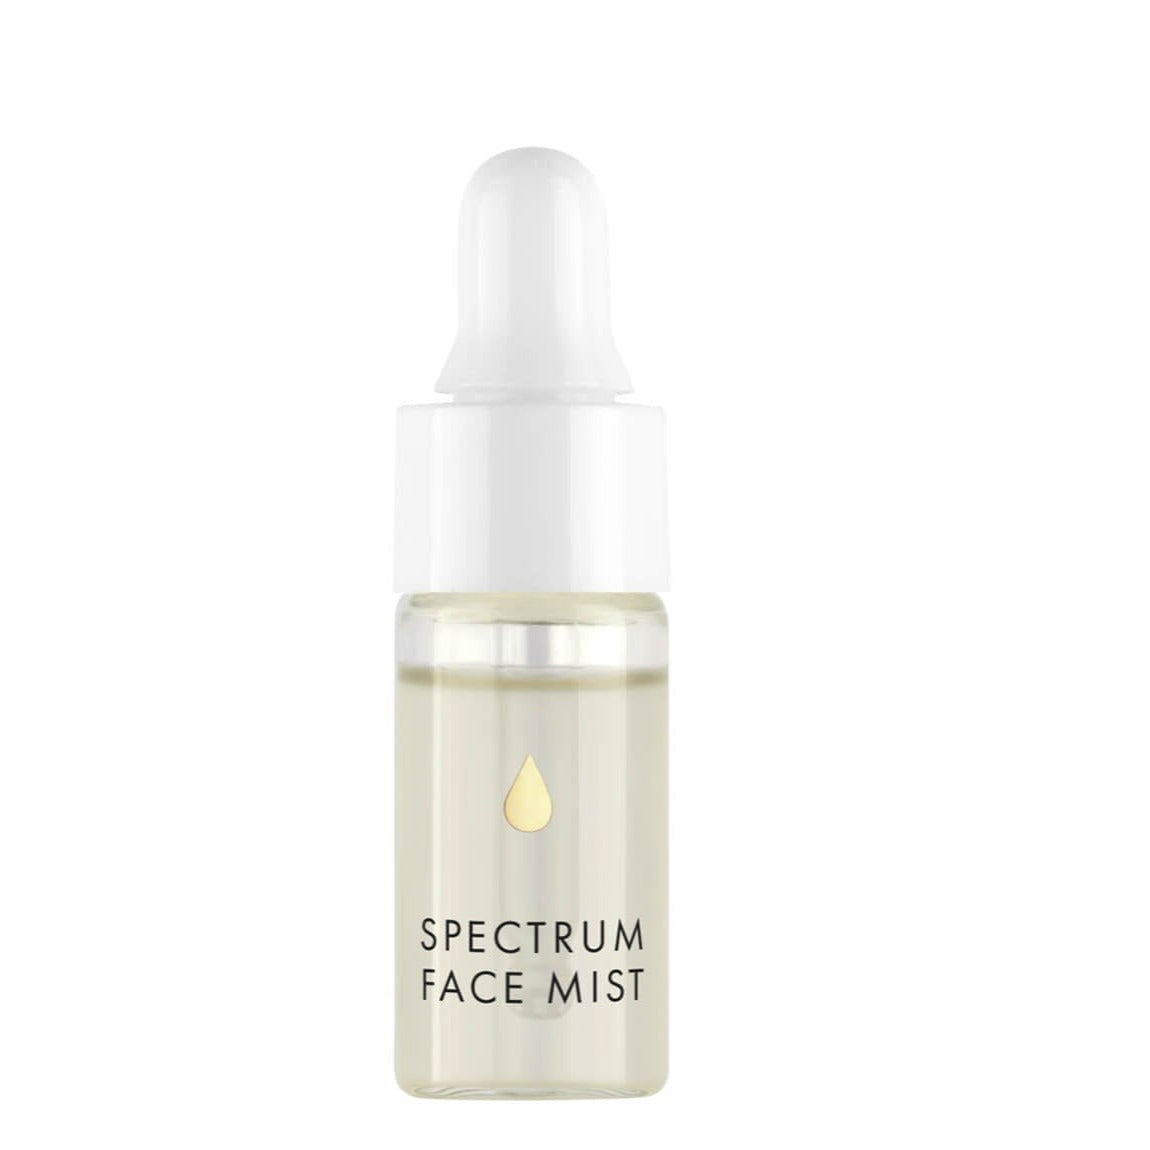 Spectrum Face Mist Sample Other Synthesis Organics 3ml